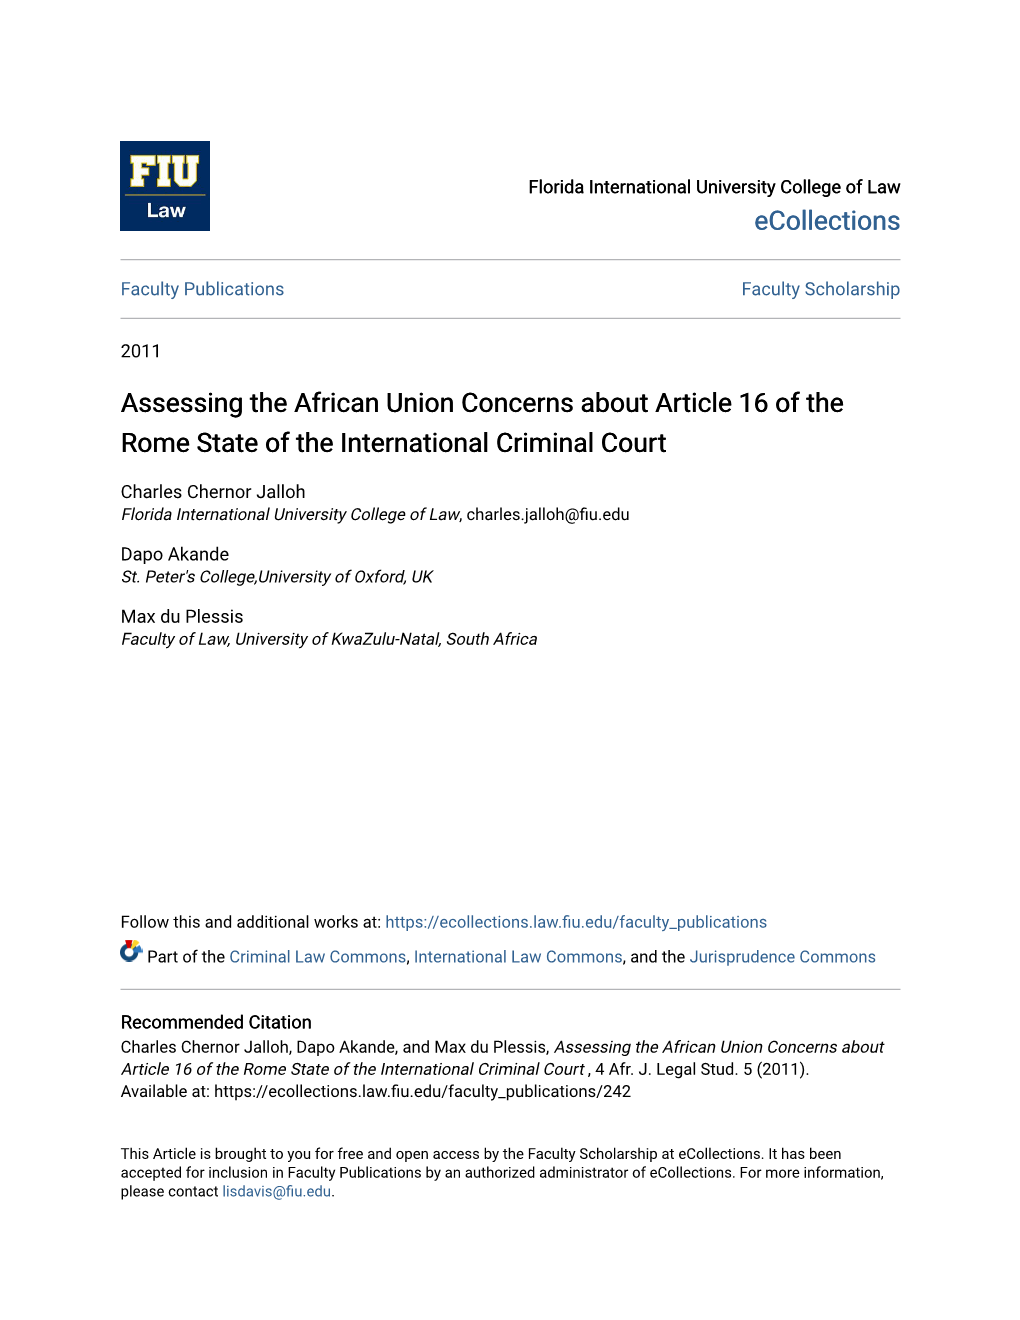 Assessing the African Union Concerns About Article 16 of the Rome State of the International Criminal Court